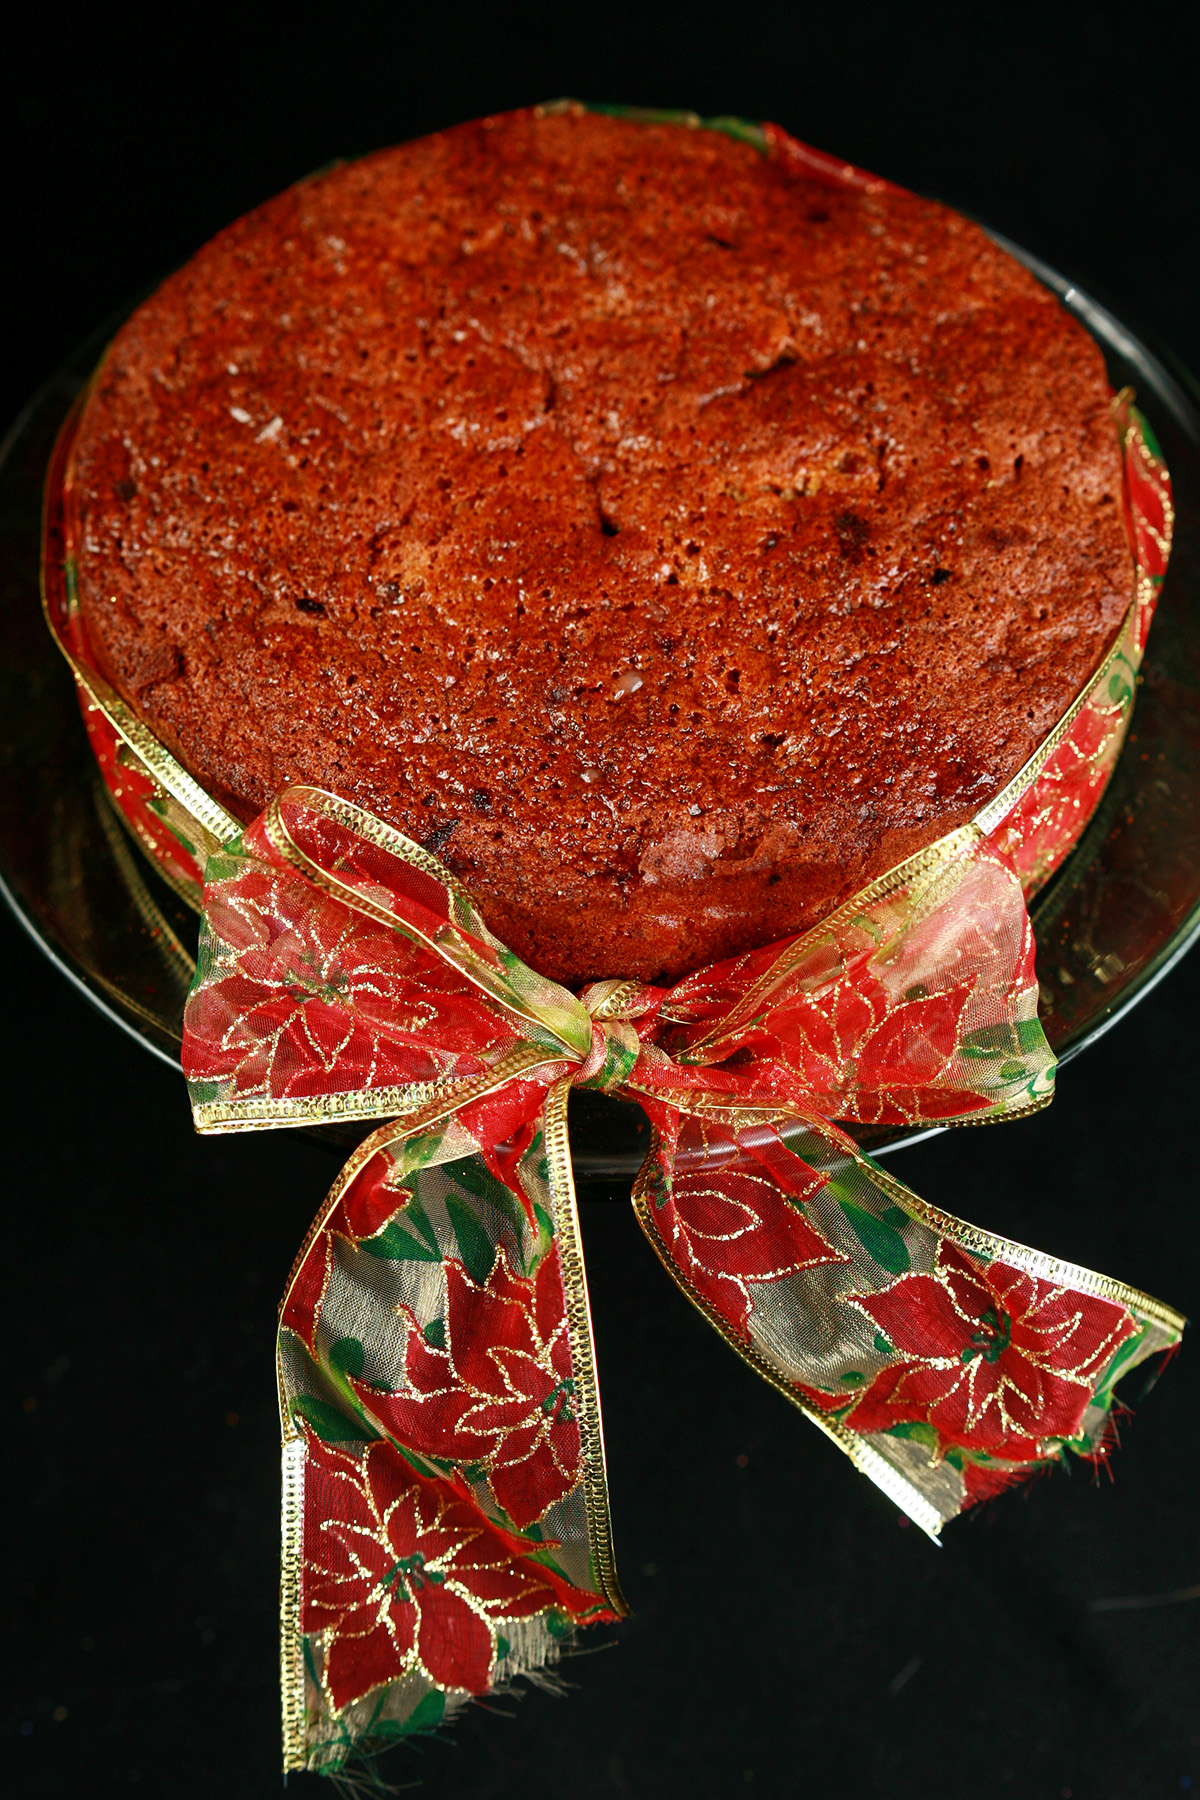 A round fruitcake, tied with a festive red, green, and gold bow.